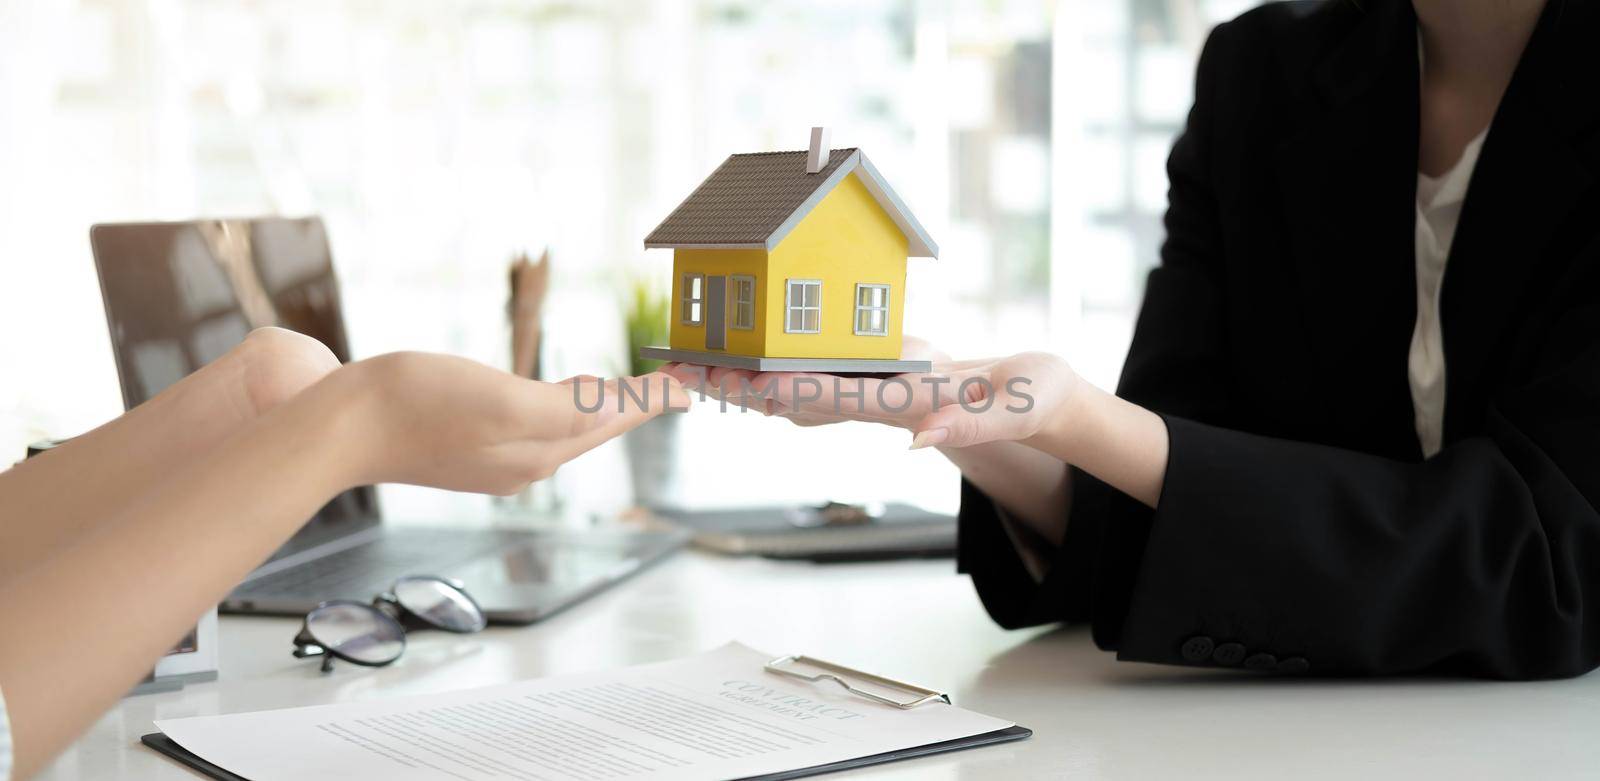 Real estate company to buy houses and land are delivering keys and houses to customers after agreeing to make a home purchase agreement and make a loan agreement. Discussion with a real estate agent.